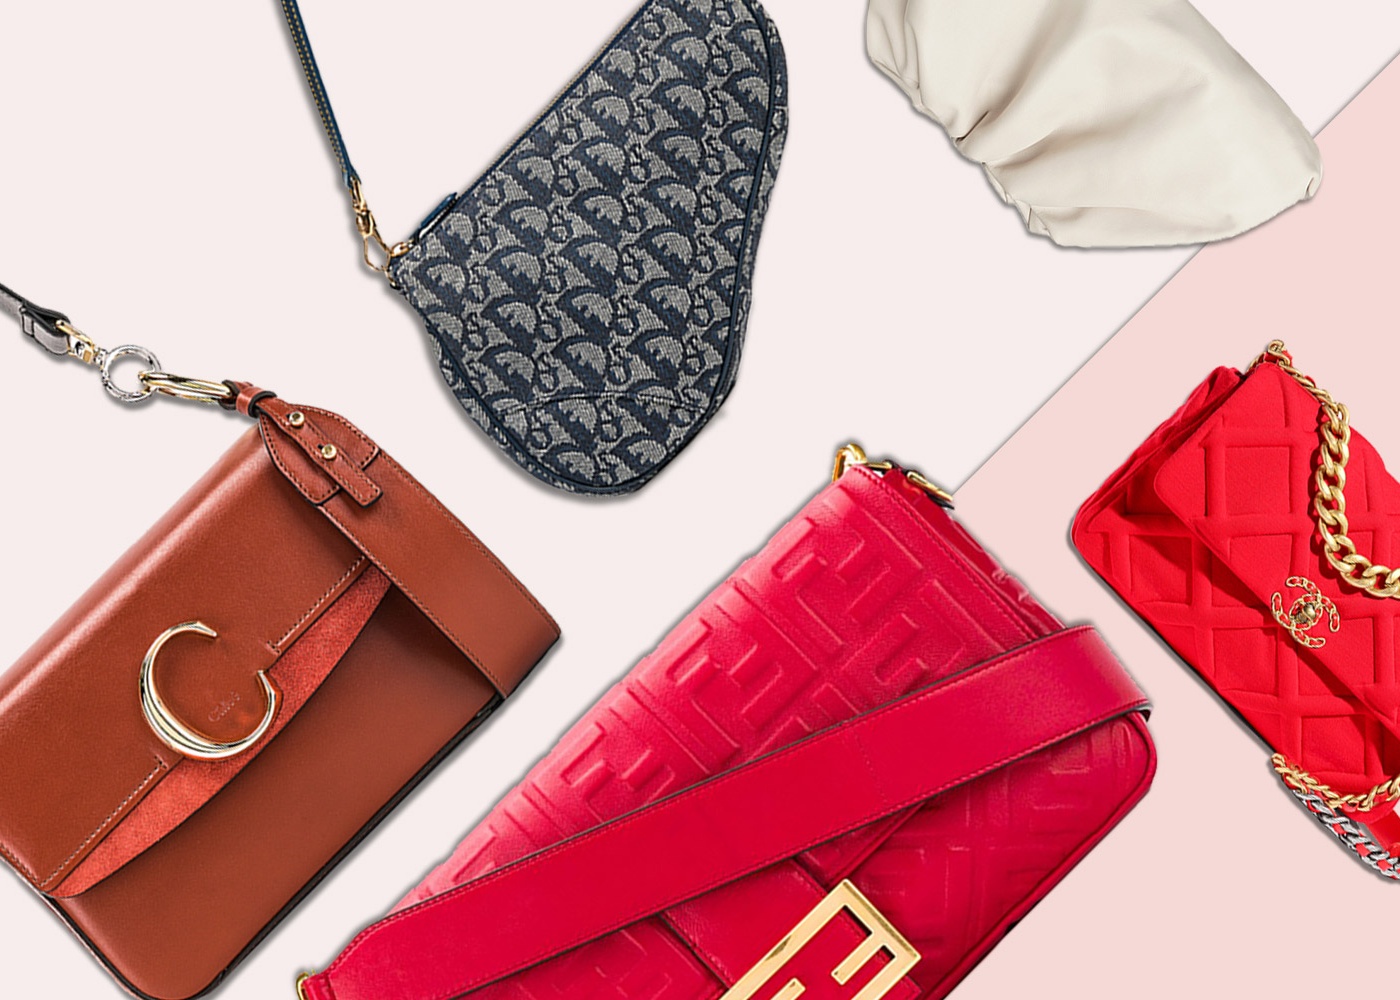 Top Designer Handbags to Invest in for 2019 | High Net Worth